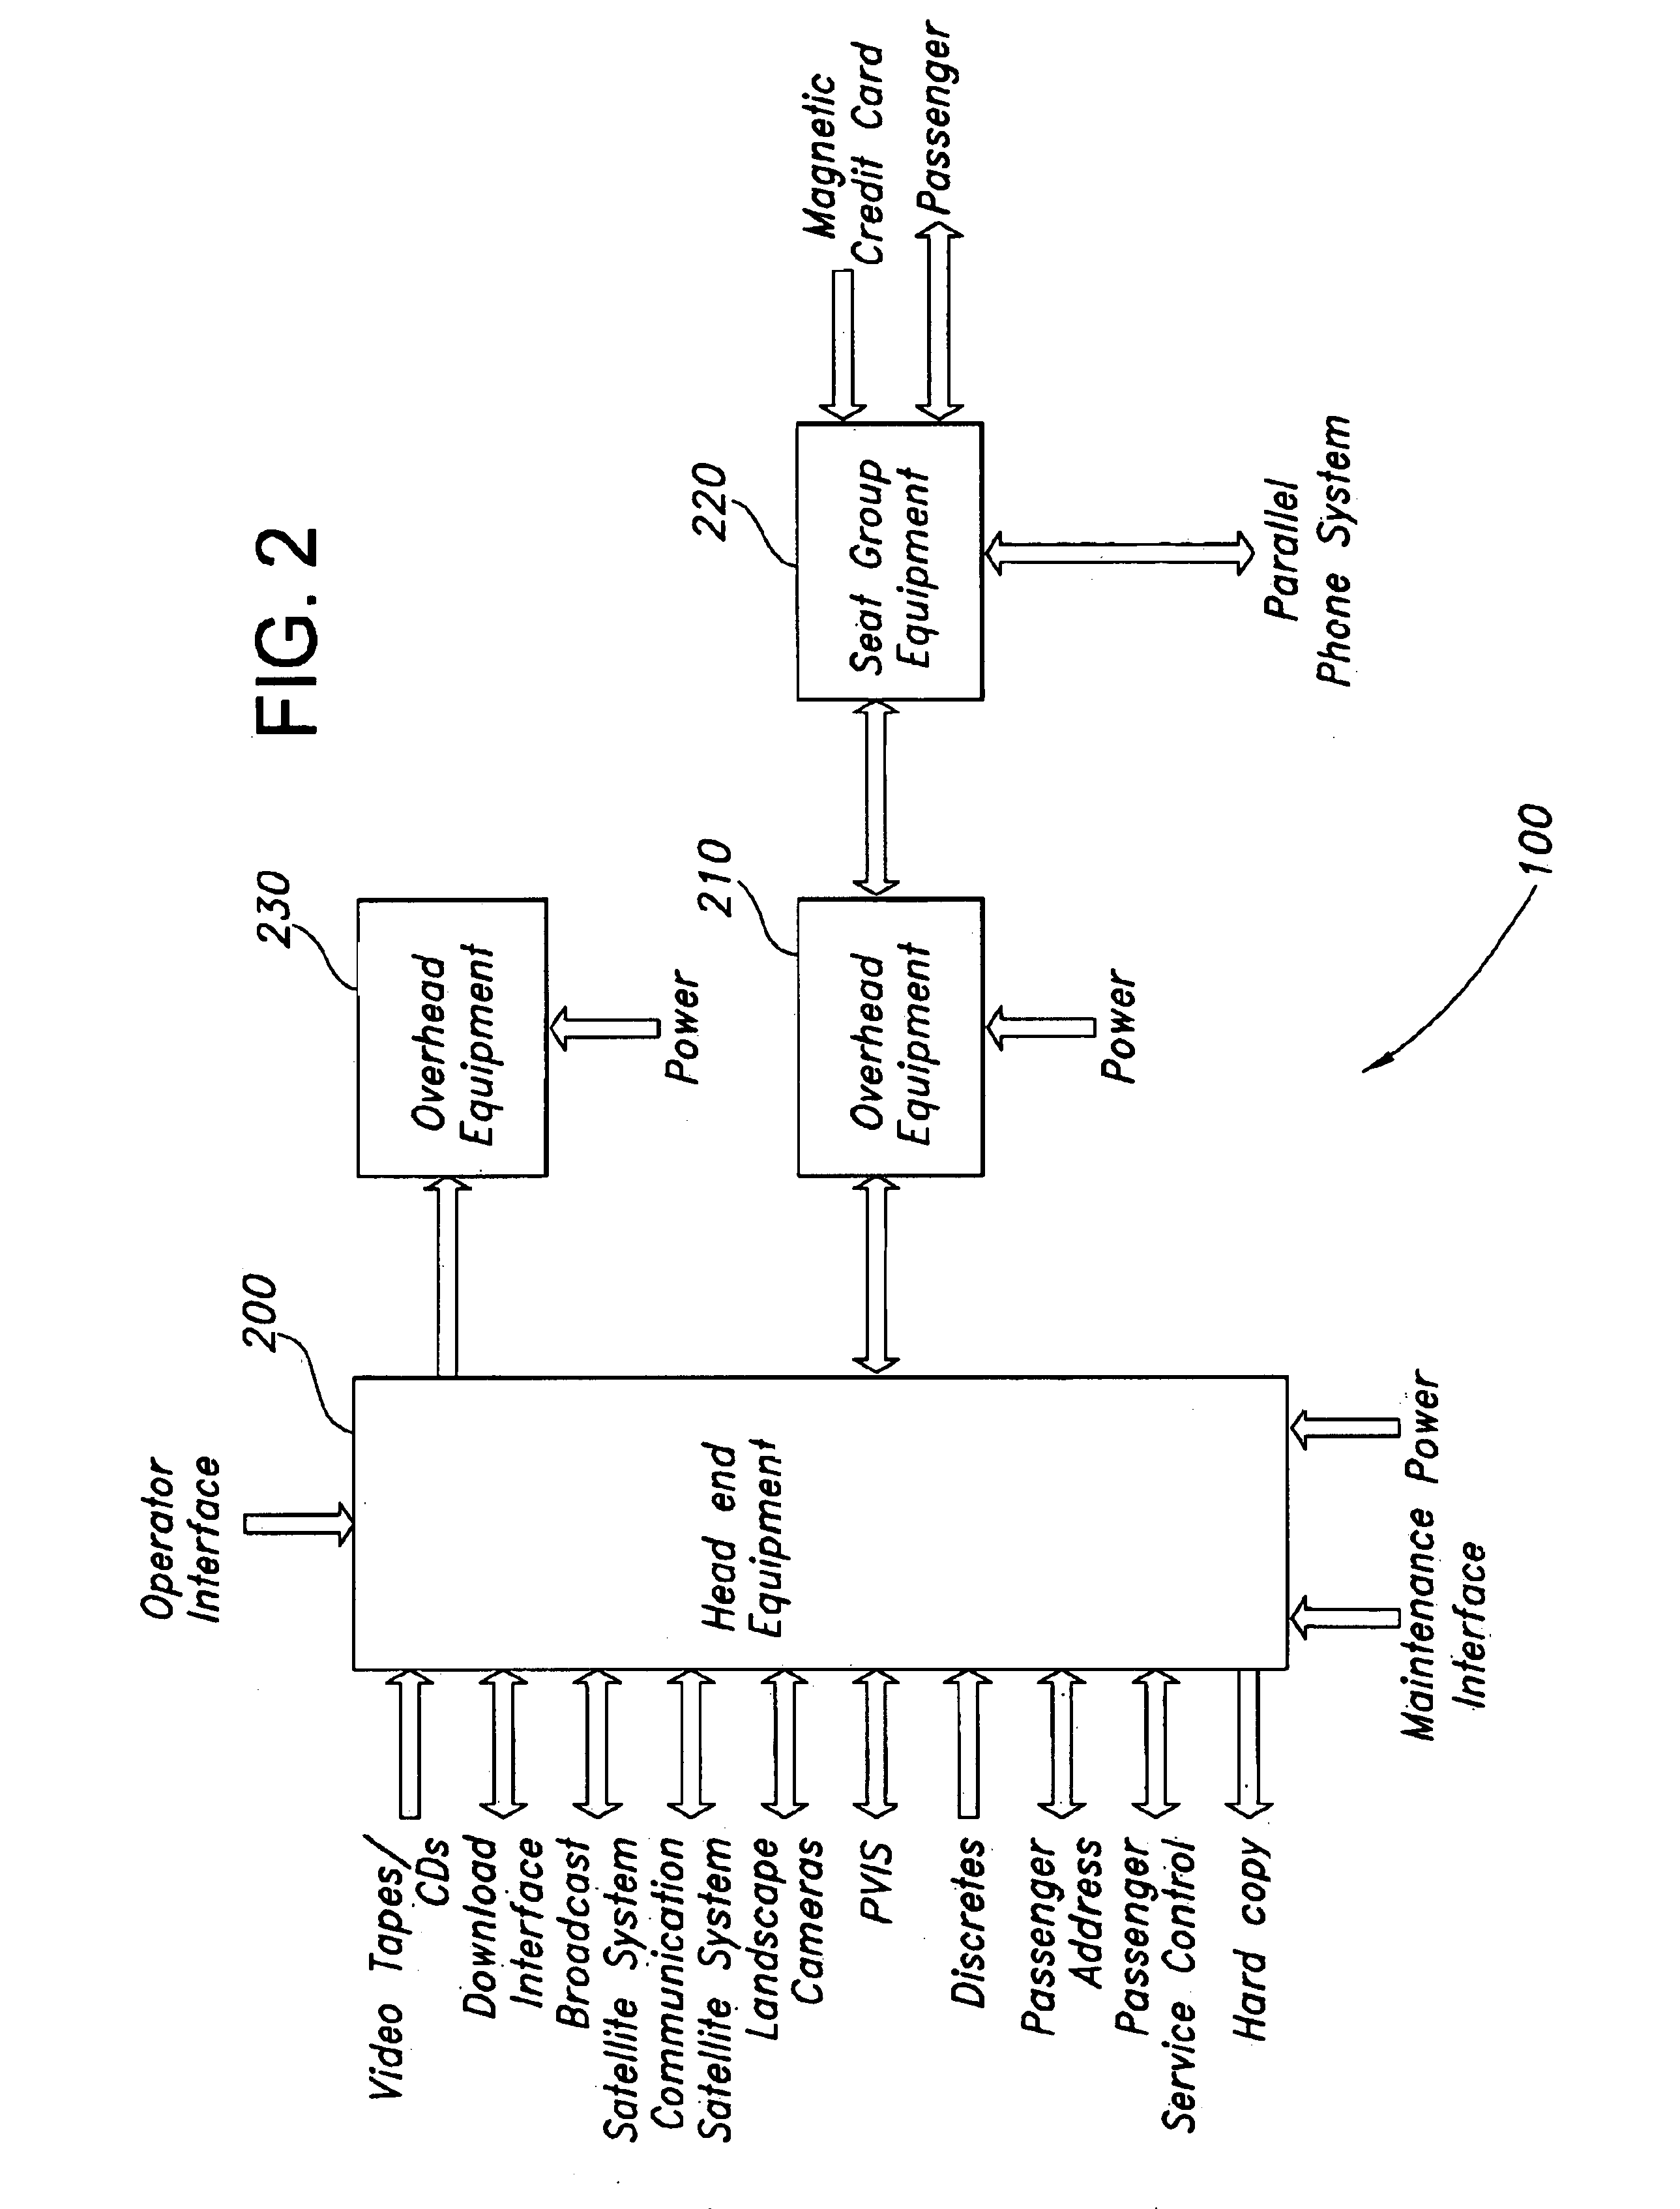 Message processor for a passenger entertainment system, method and article of manufacture